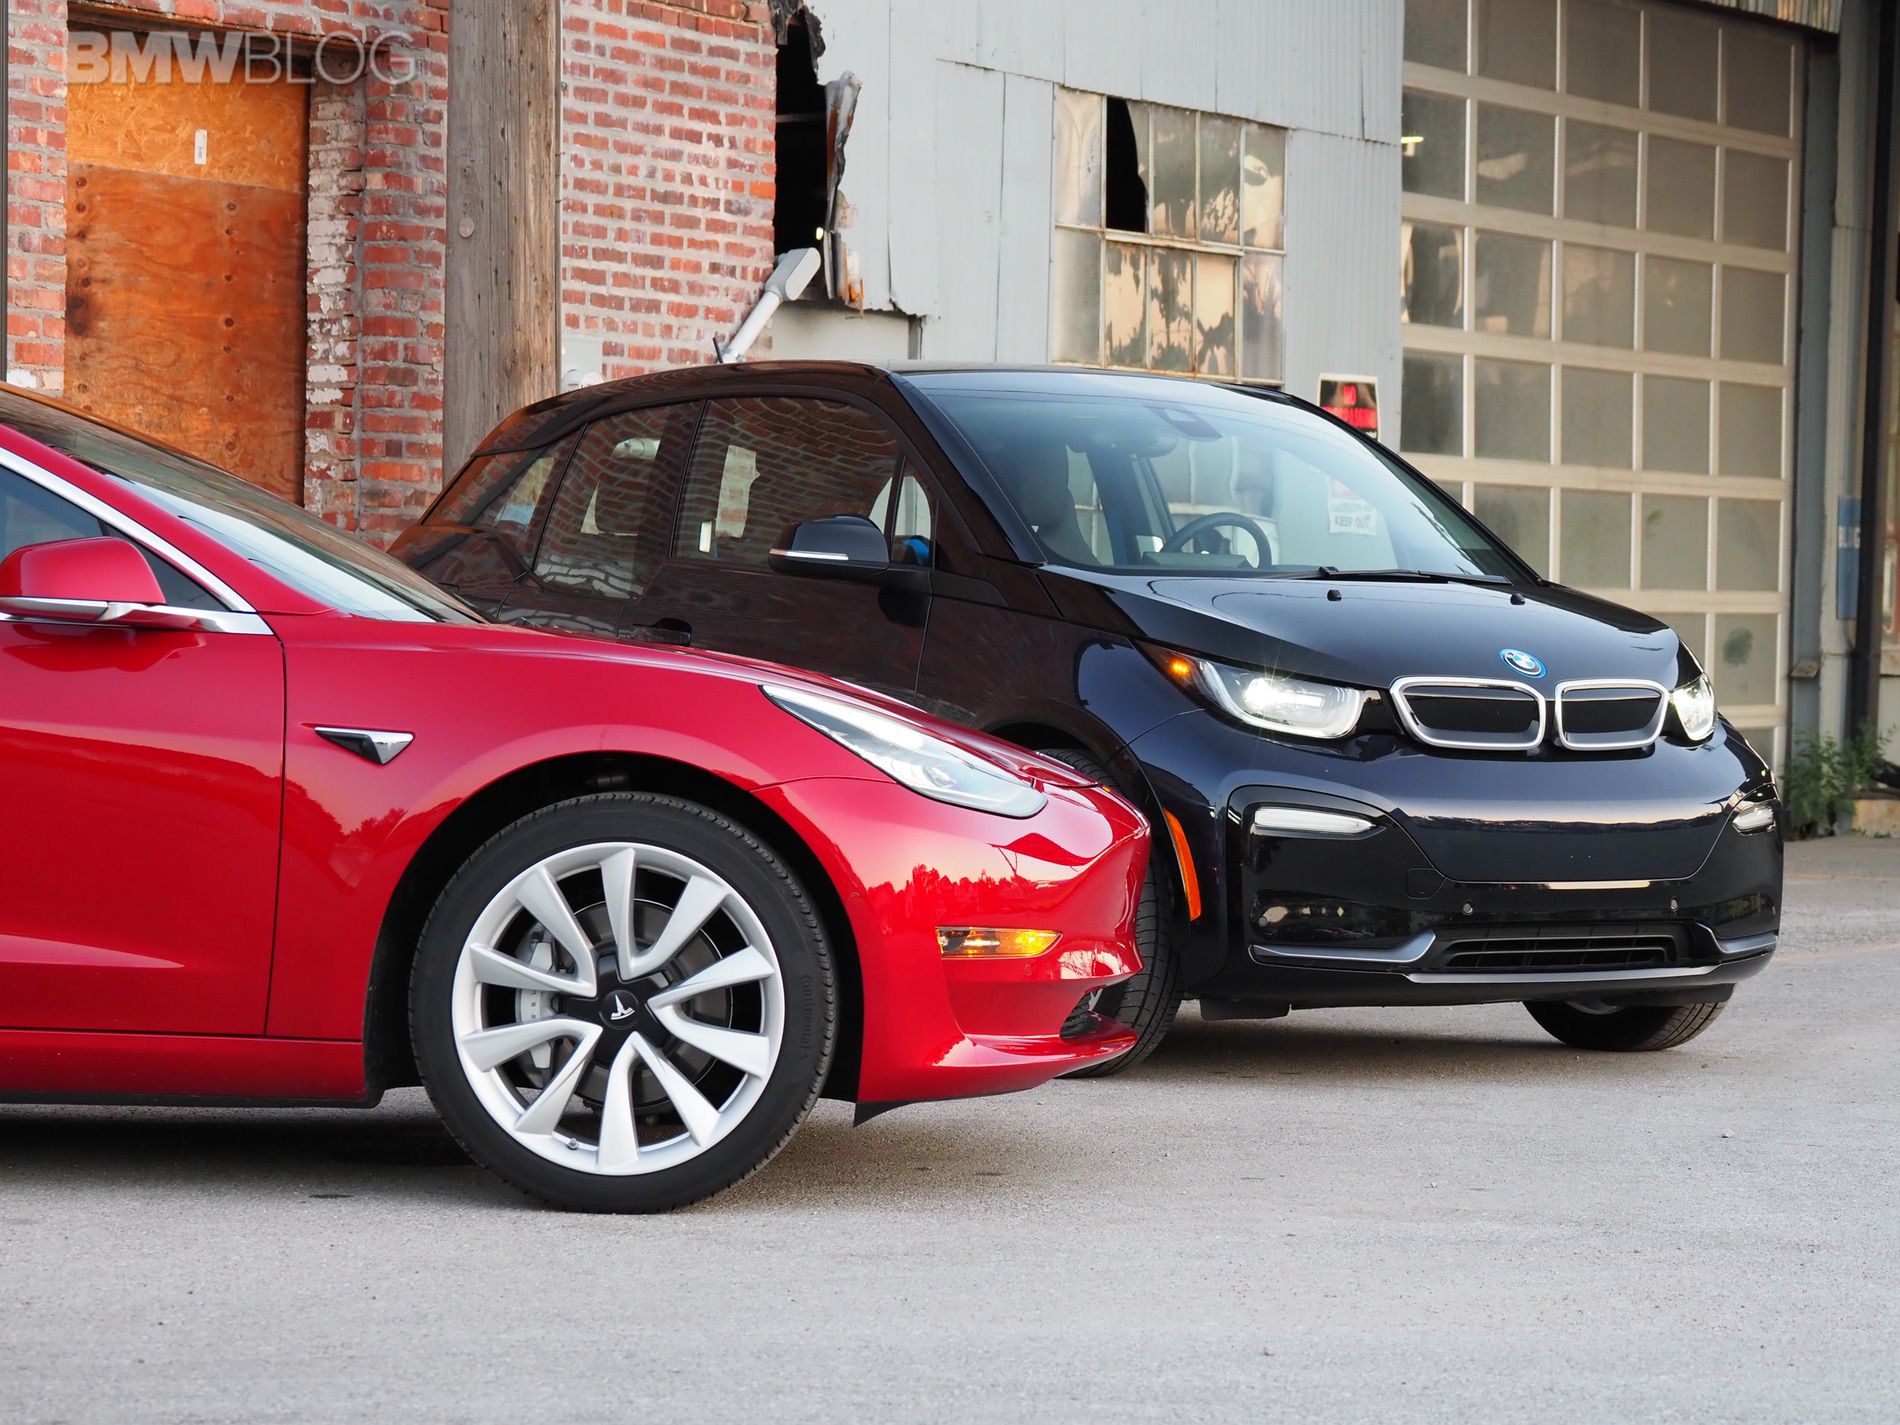 White House aims to end subsidies for electric cars